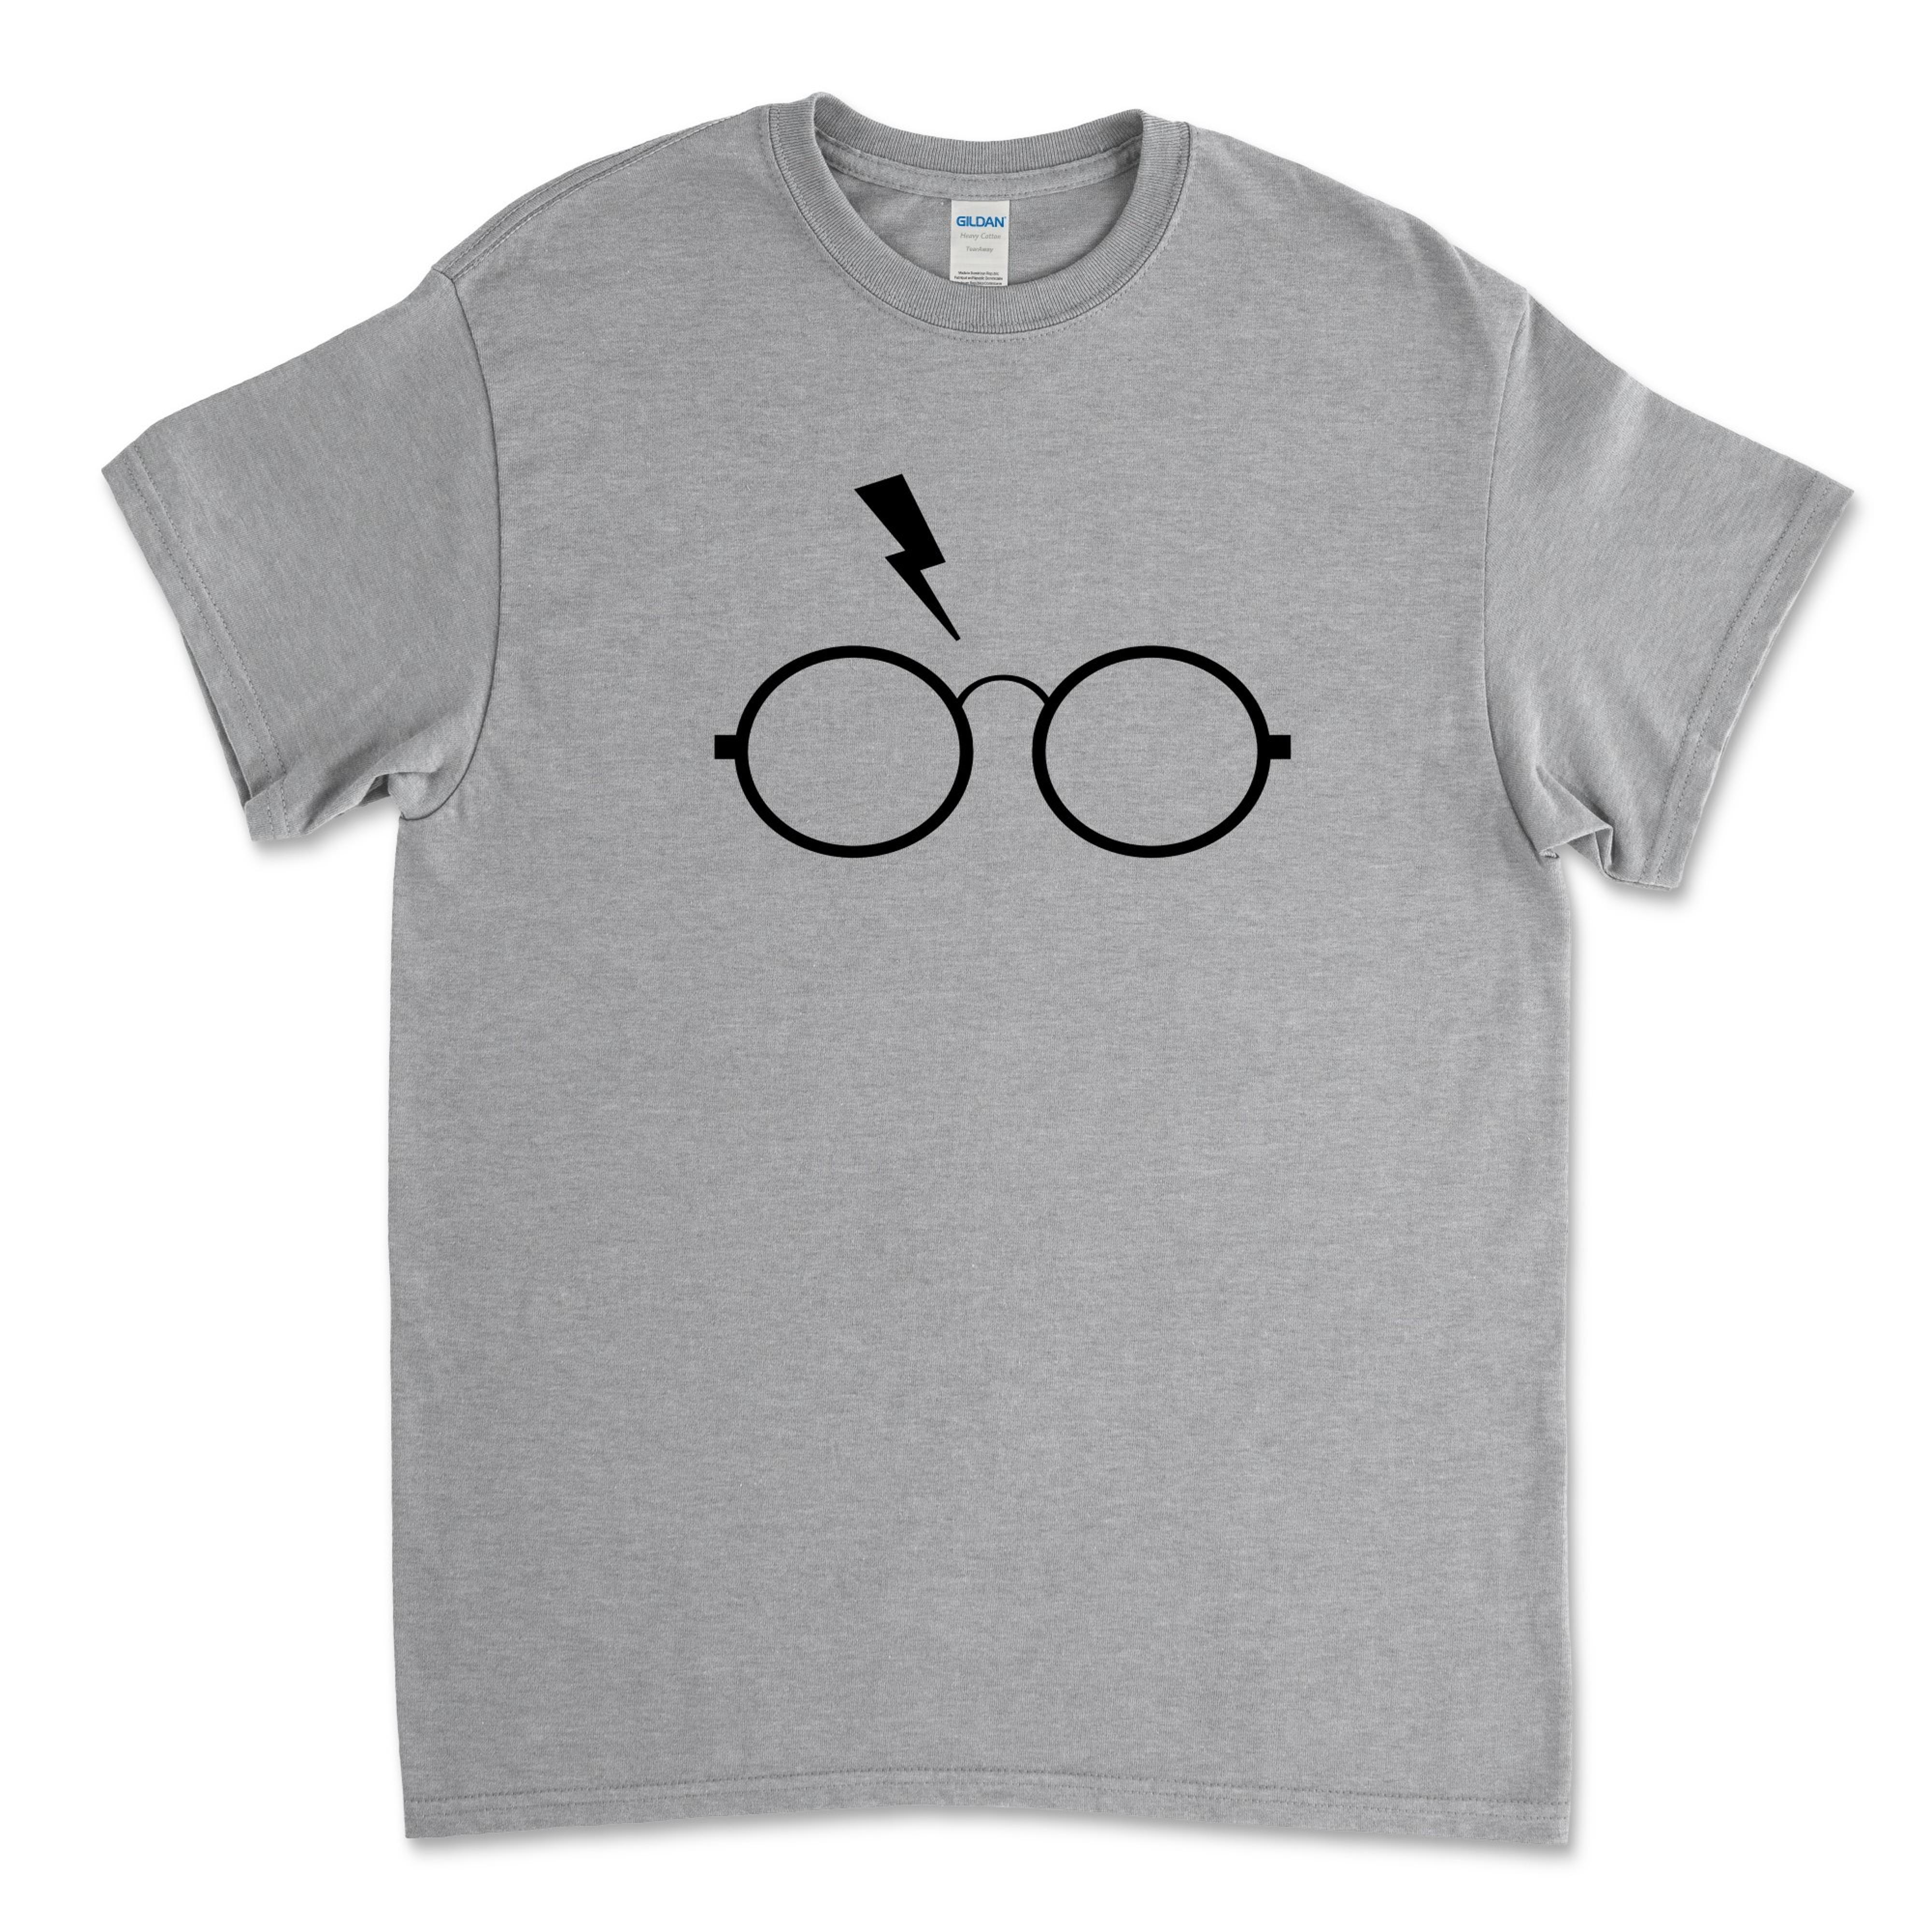 Wizardly World Youth T-Shirt With Glasses And Bolt